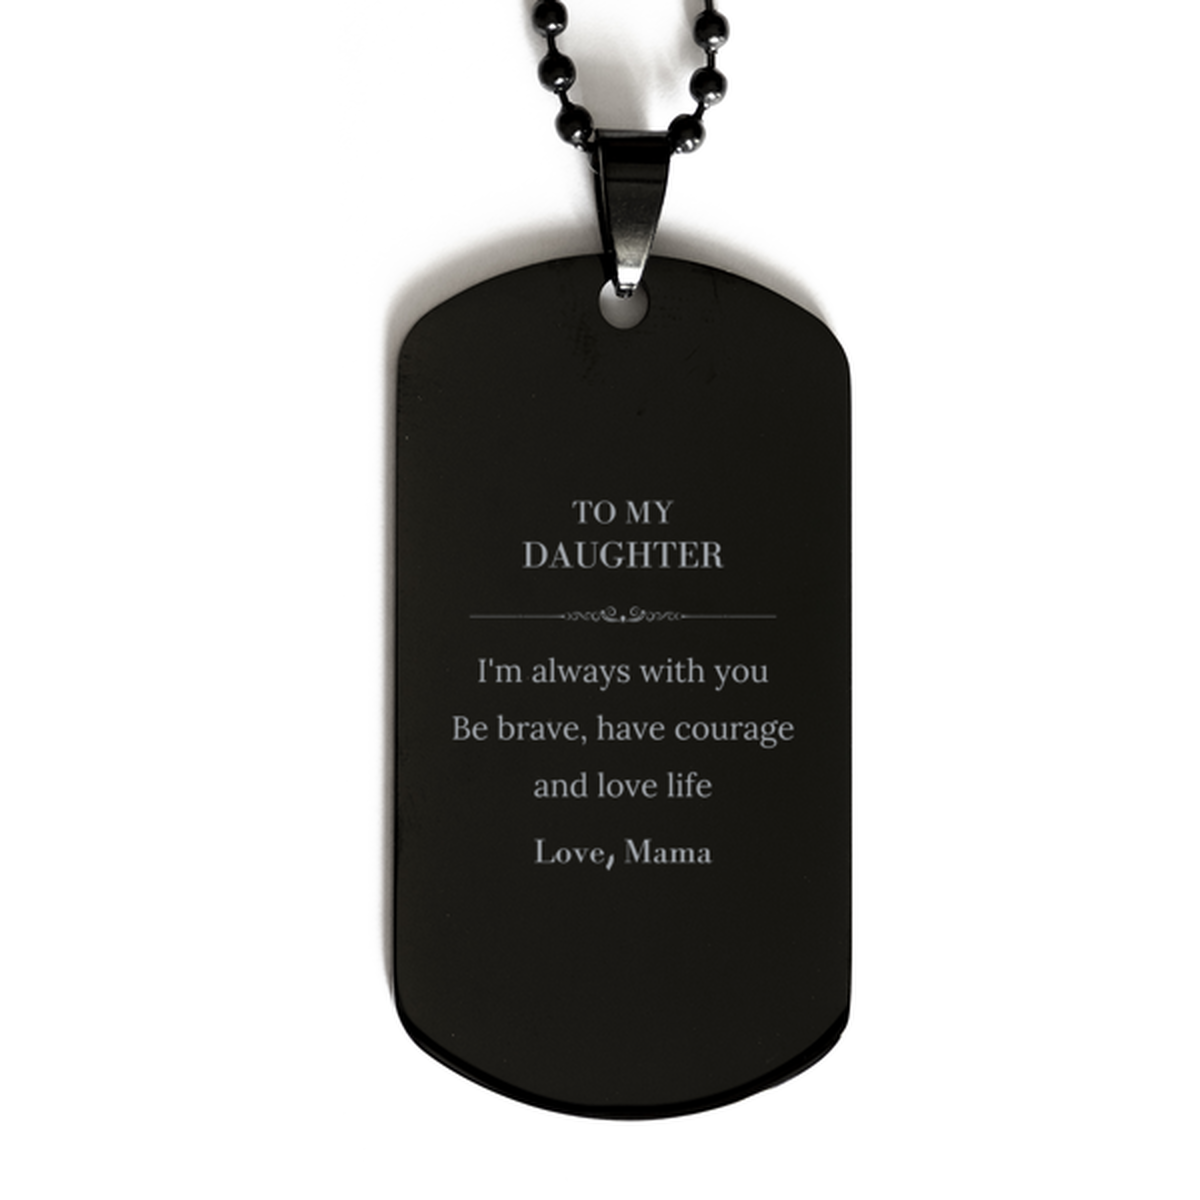 To My Daughter Gifts from Mama, Unique Black Dog Tag Inspirational Christmas Birthday Graduation Gifts for Daughter I'm always with you. Be brave, have courage and love life. Love, Mama